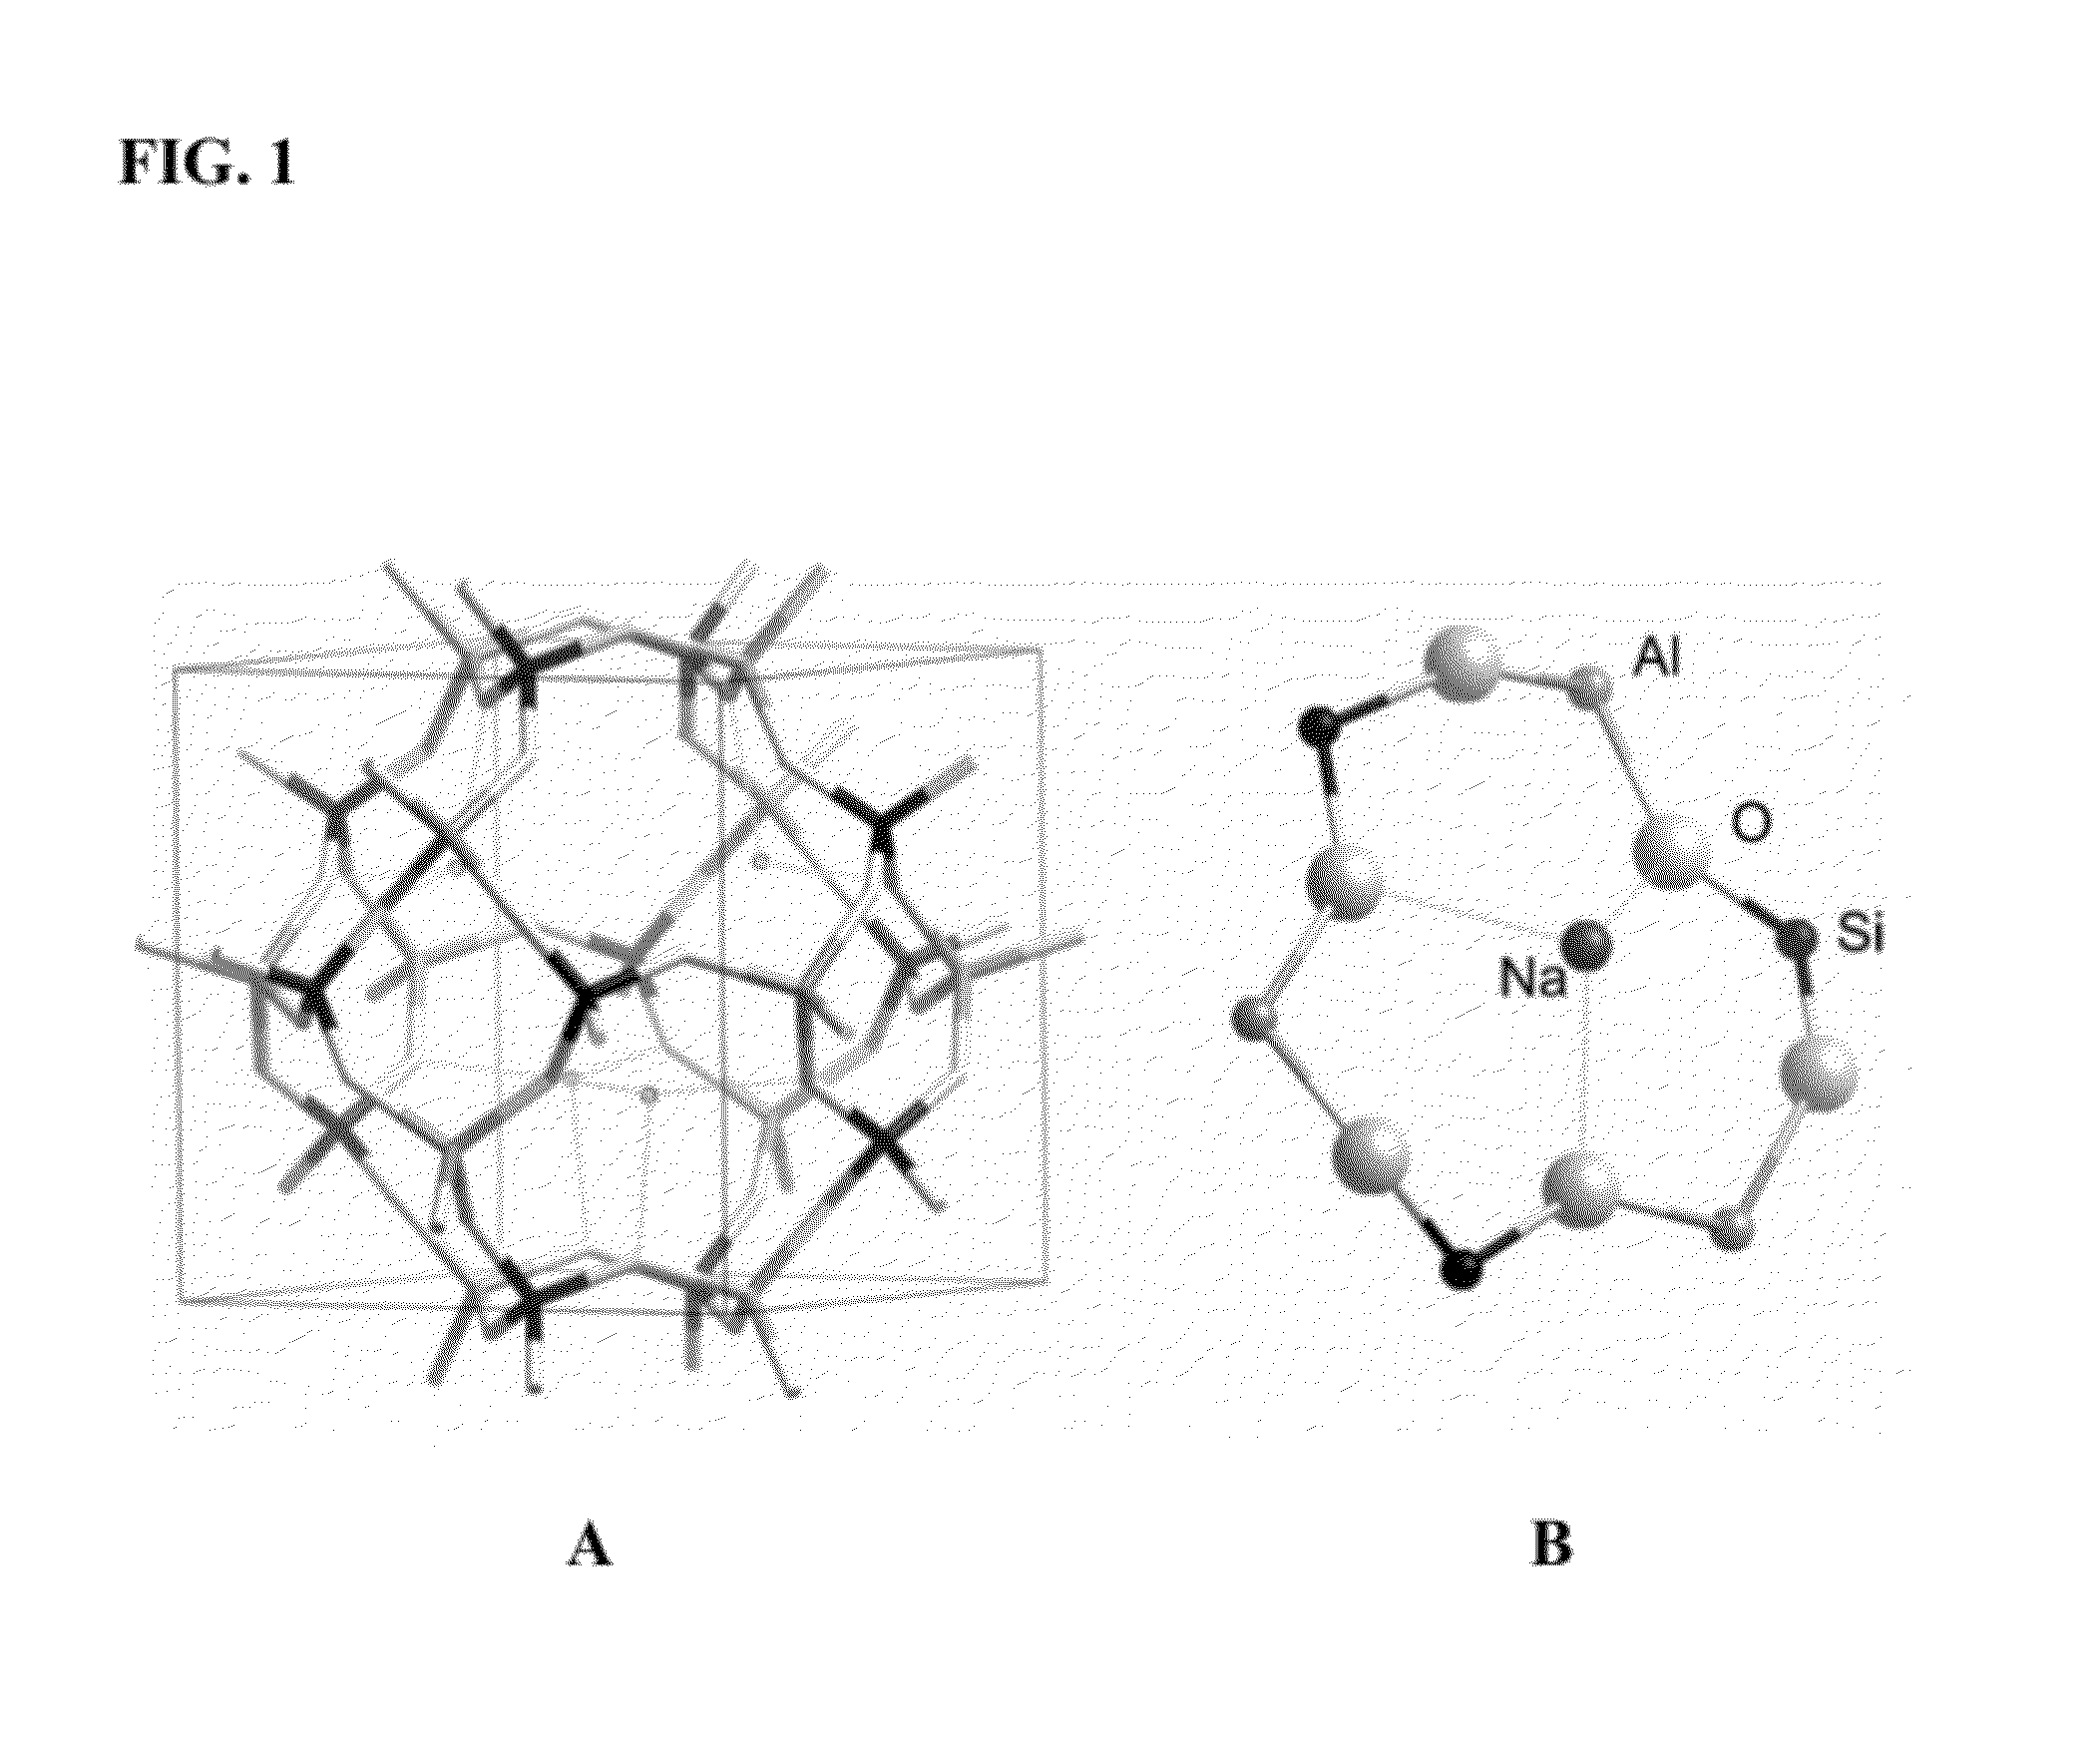 Formulation and method for improved ion exchange in zeolites and related aluminosilicates using polymer solutions